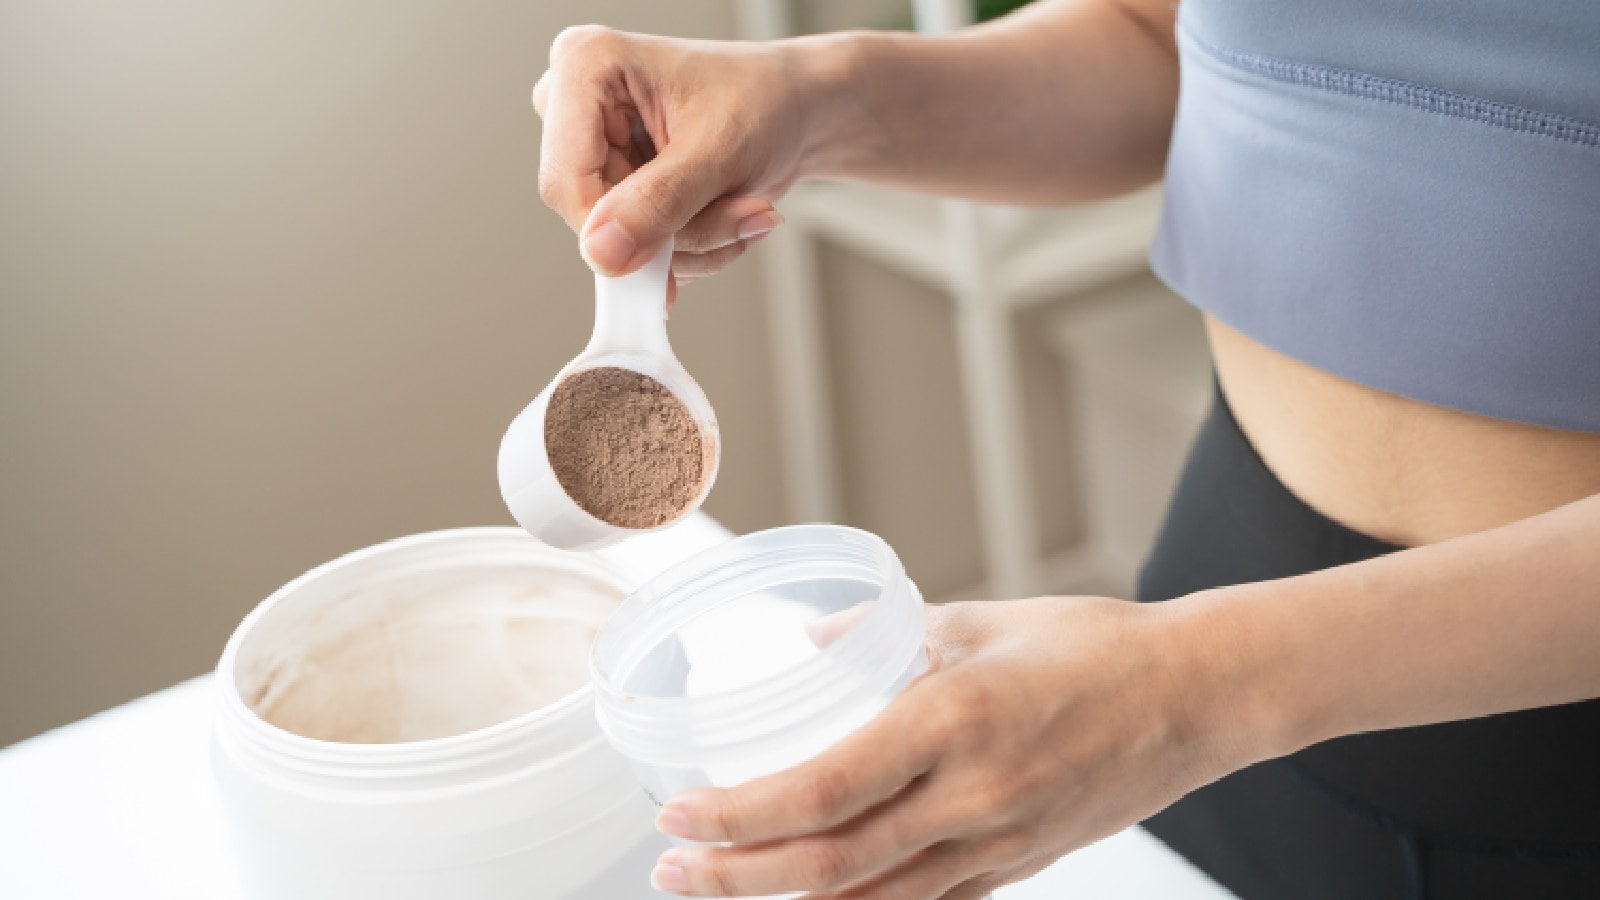 The 5 best post-workout protein powders for muscle recovery